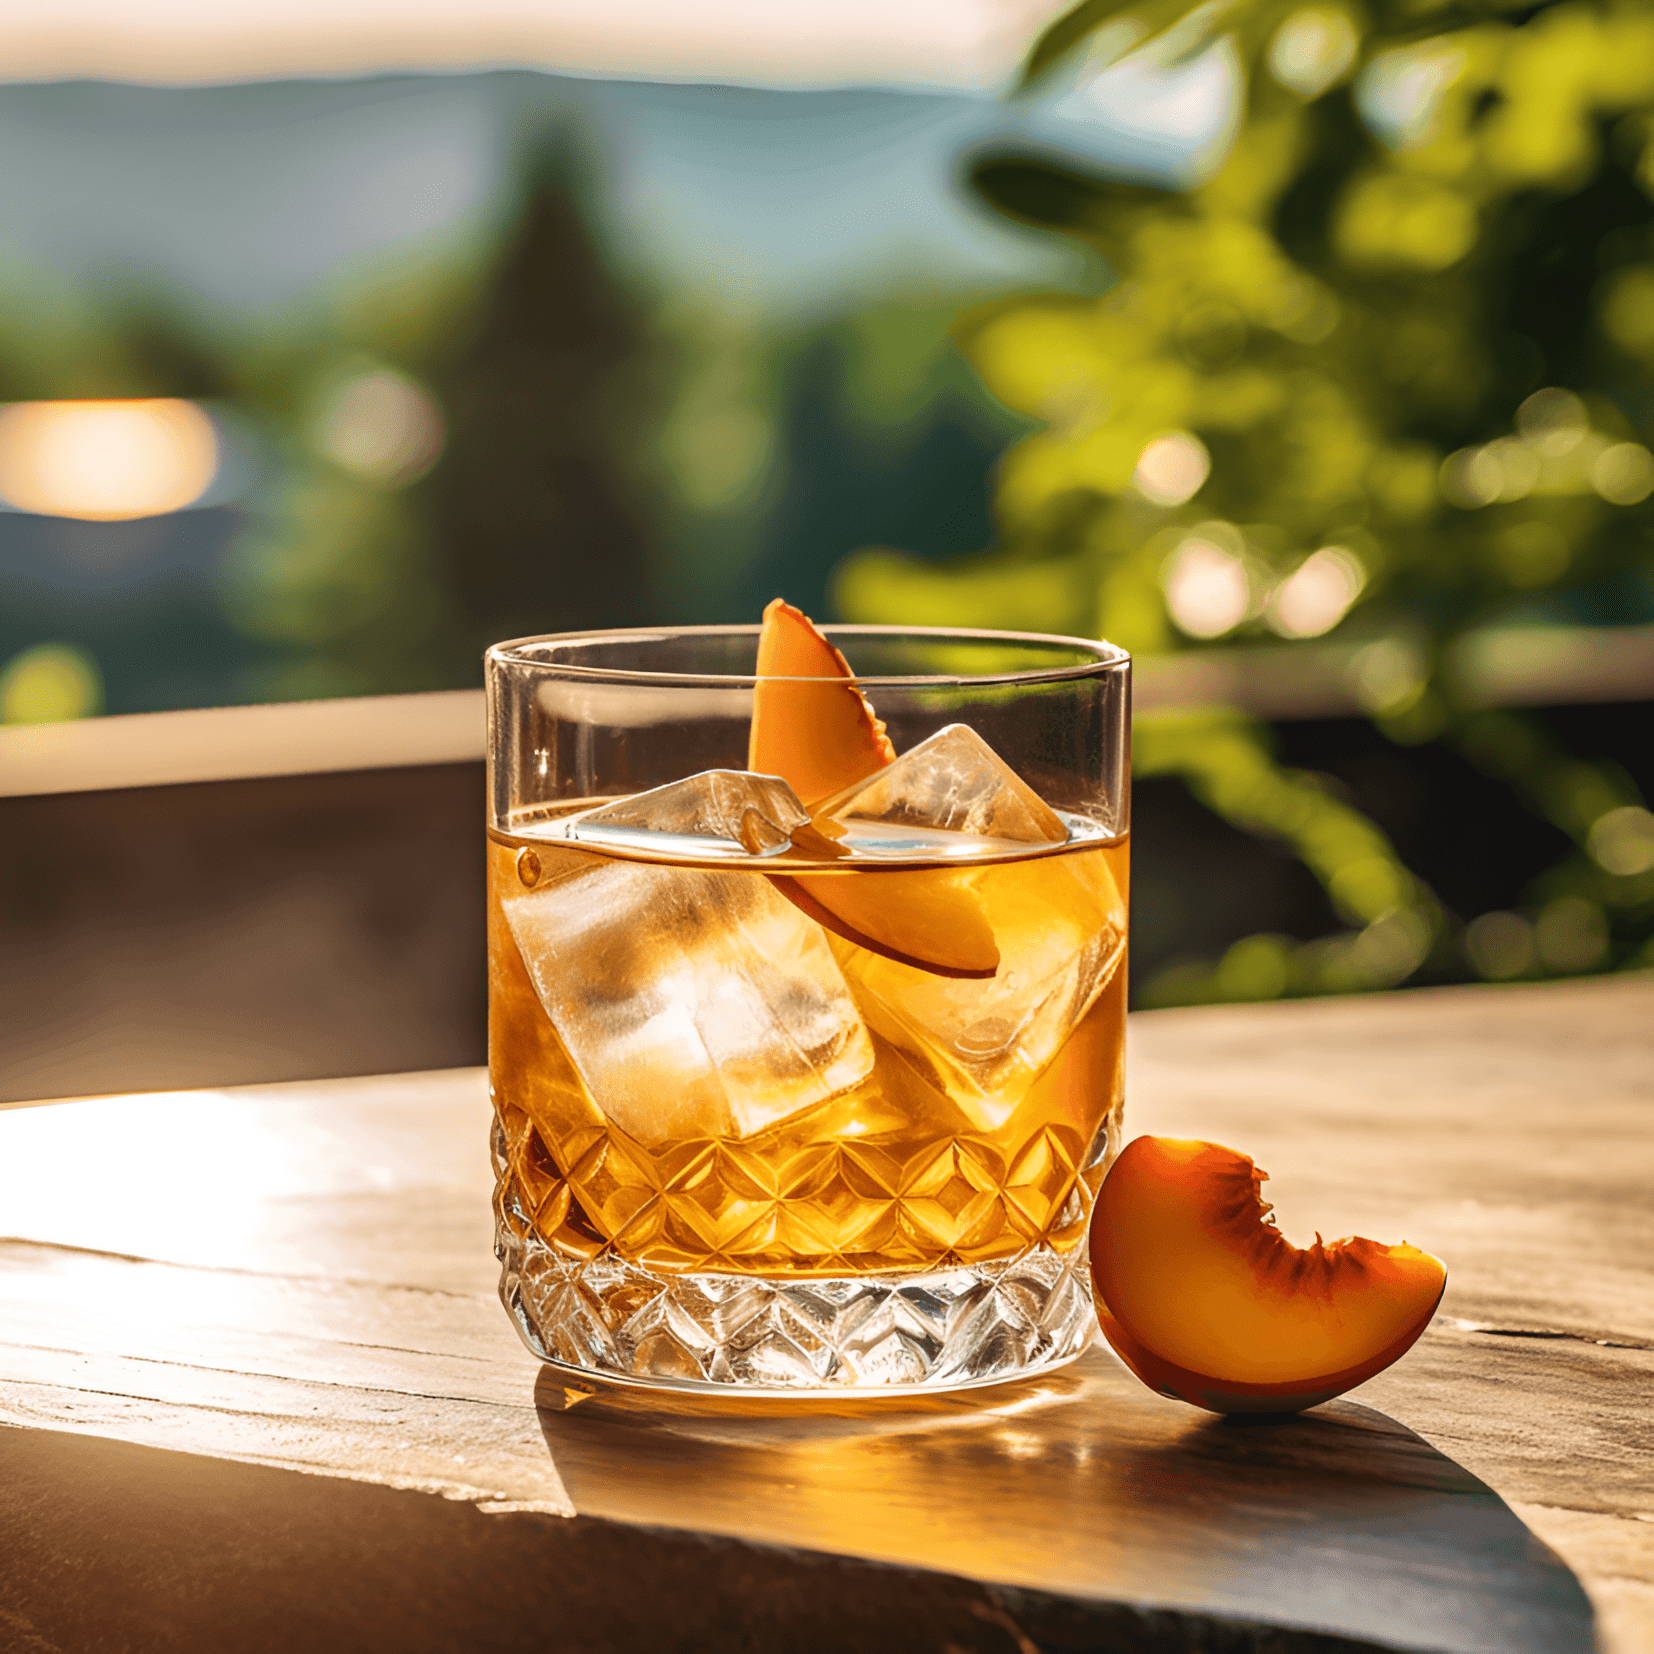 Georgia Cocktail Recipe - The Georgia cocktail is a delightful balance of sweet, fruity, and slightly tart flavors. The combination of peach, lemon, and orange creates a refreshing and light taste, while the bourbon adds a hint of warmth and depth.